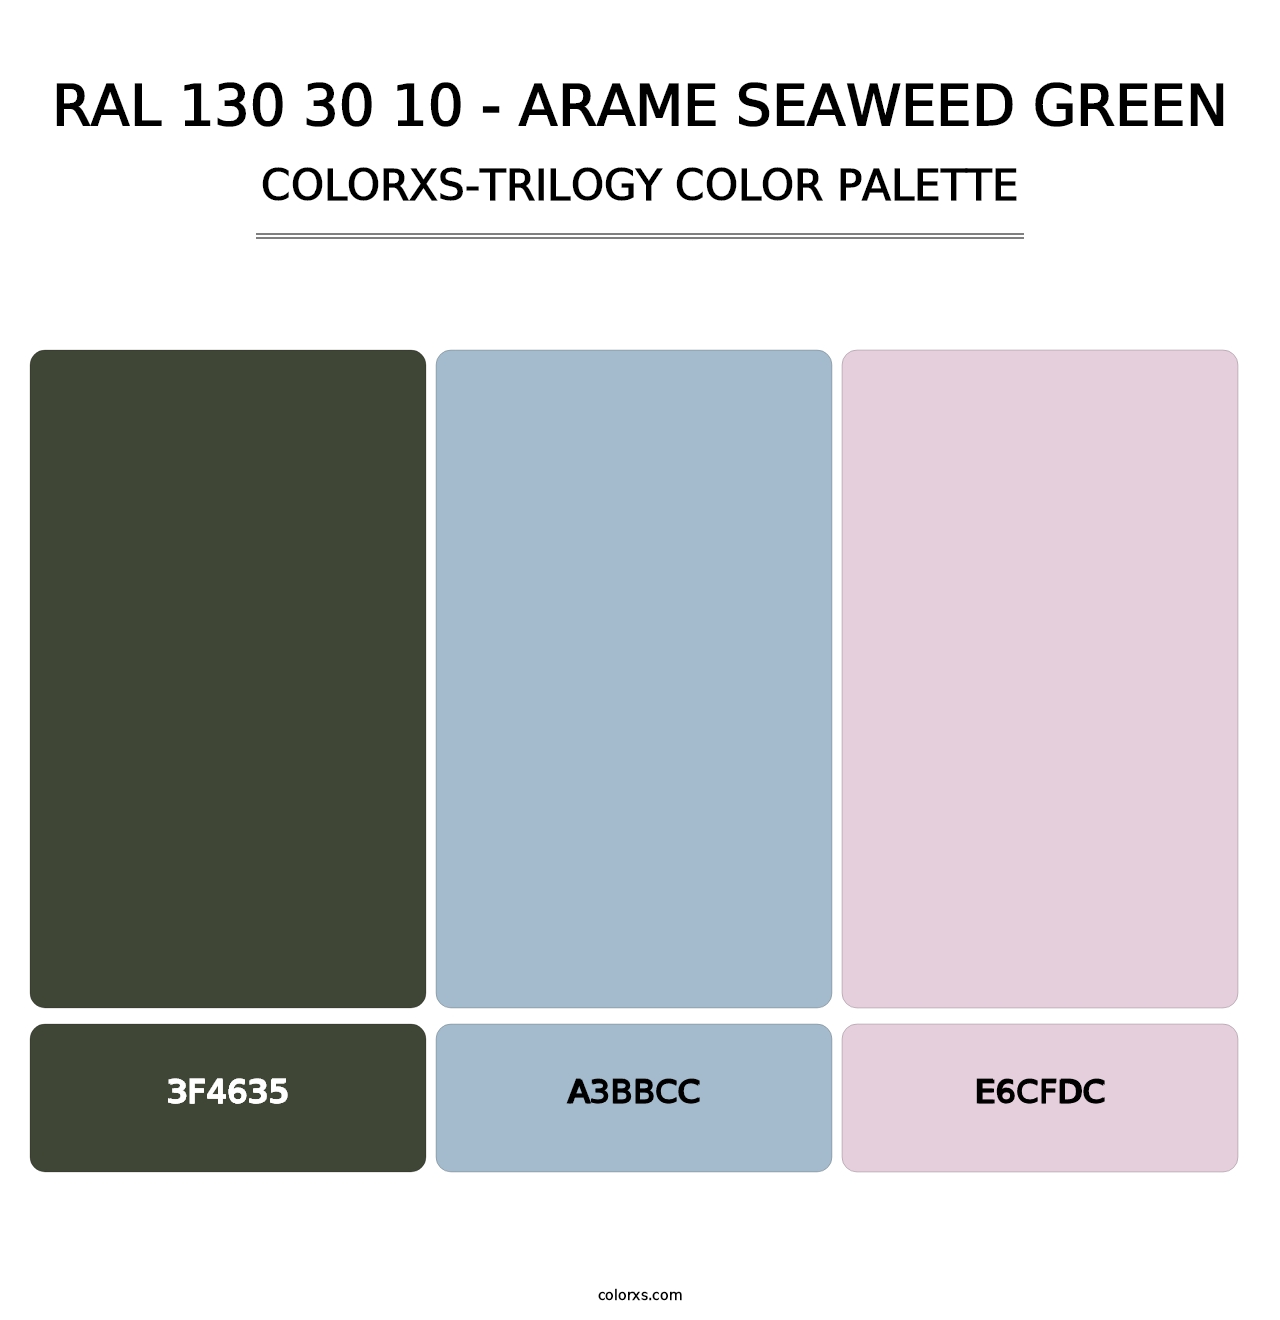 RAL 130 30 10 - Arame Seaweed Green - Colorxs Trilogy Palette